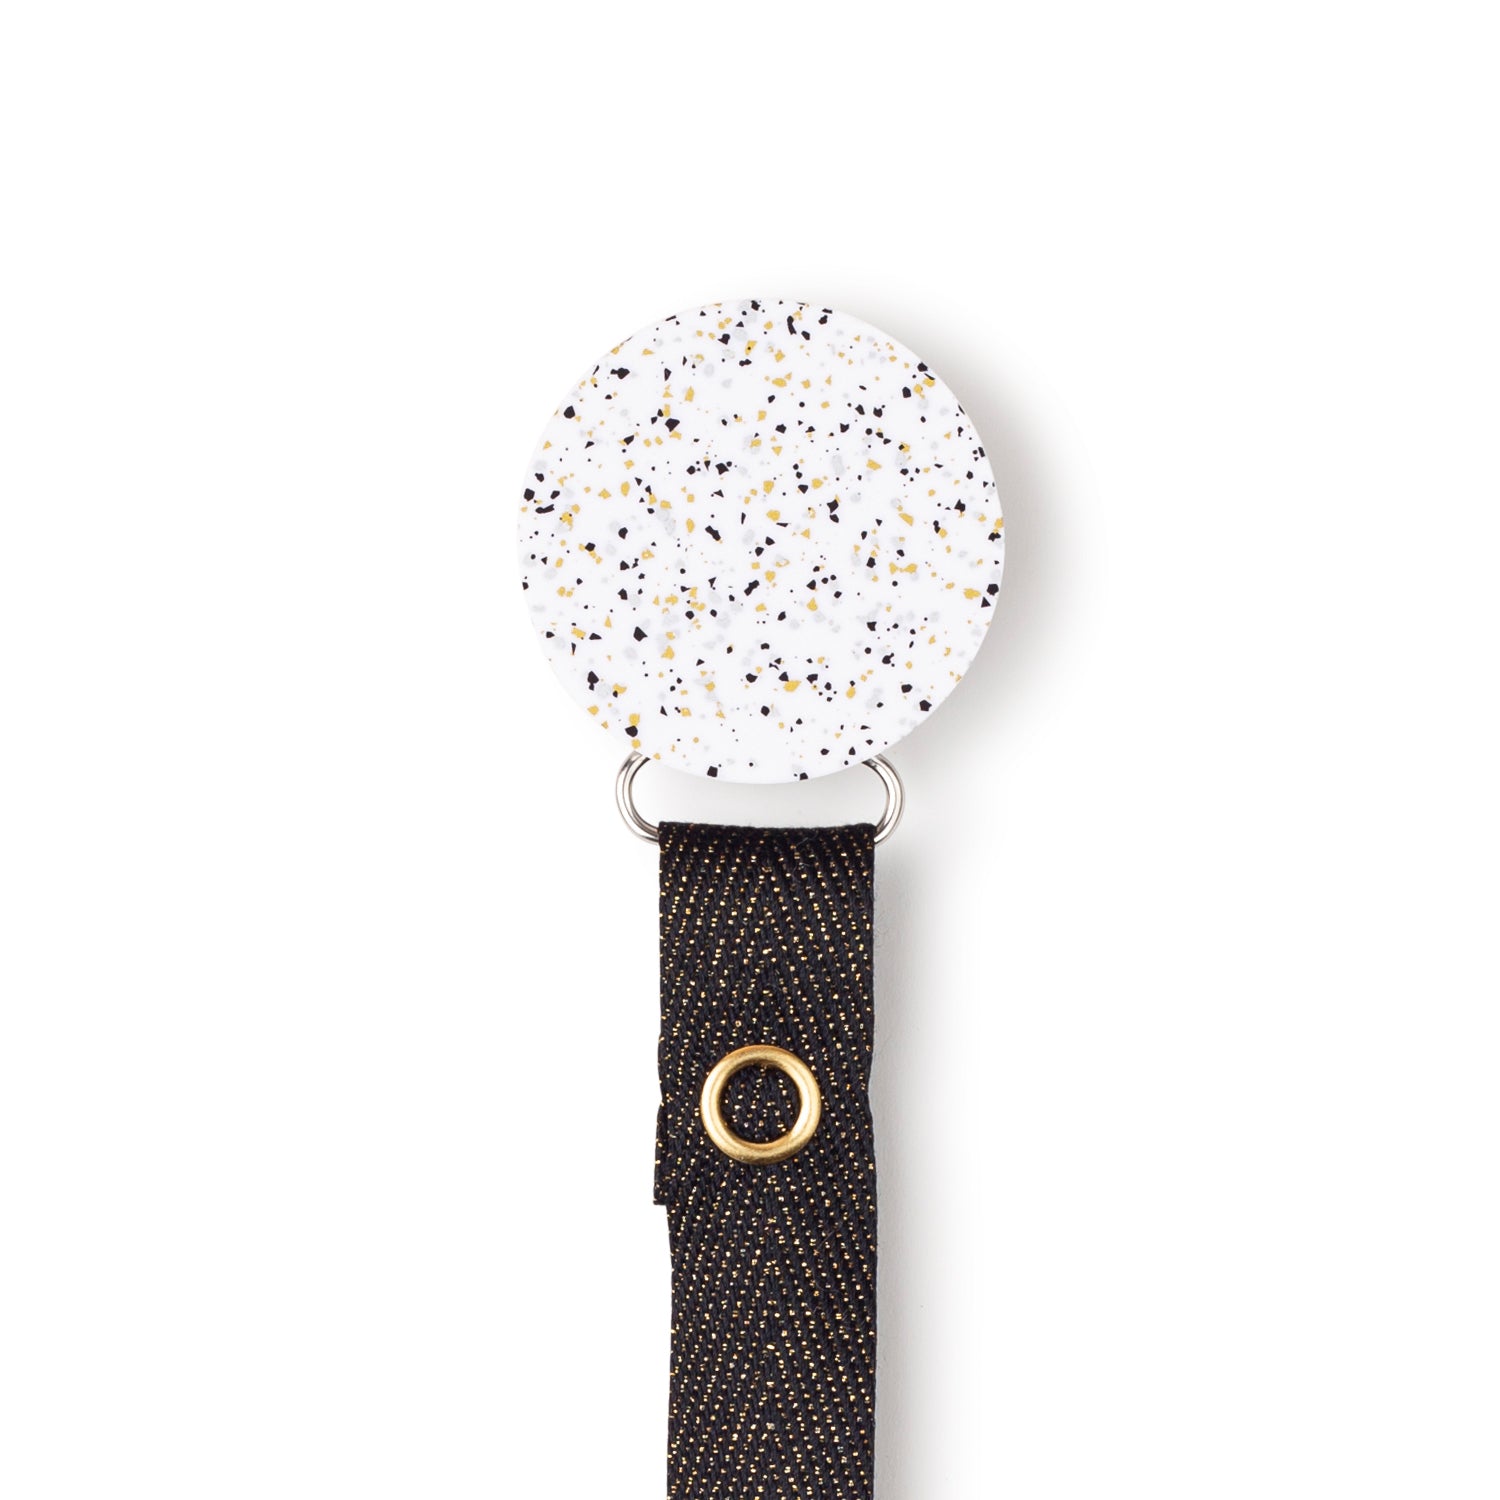 Classy Paci Speckled metallic gold black silver circle clip with Bibs pacifier GIFT SET